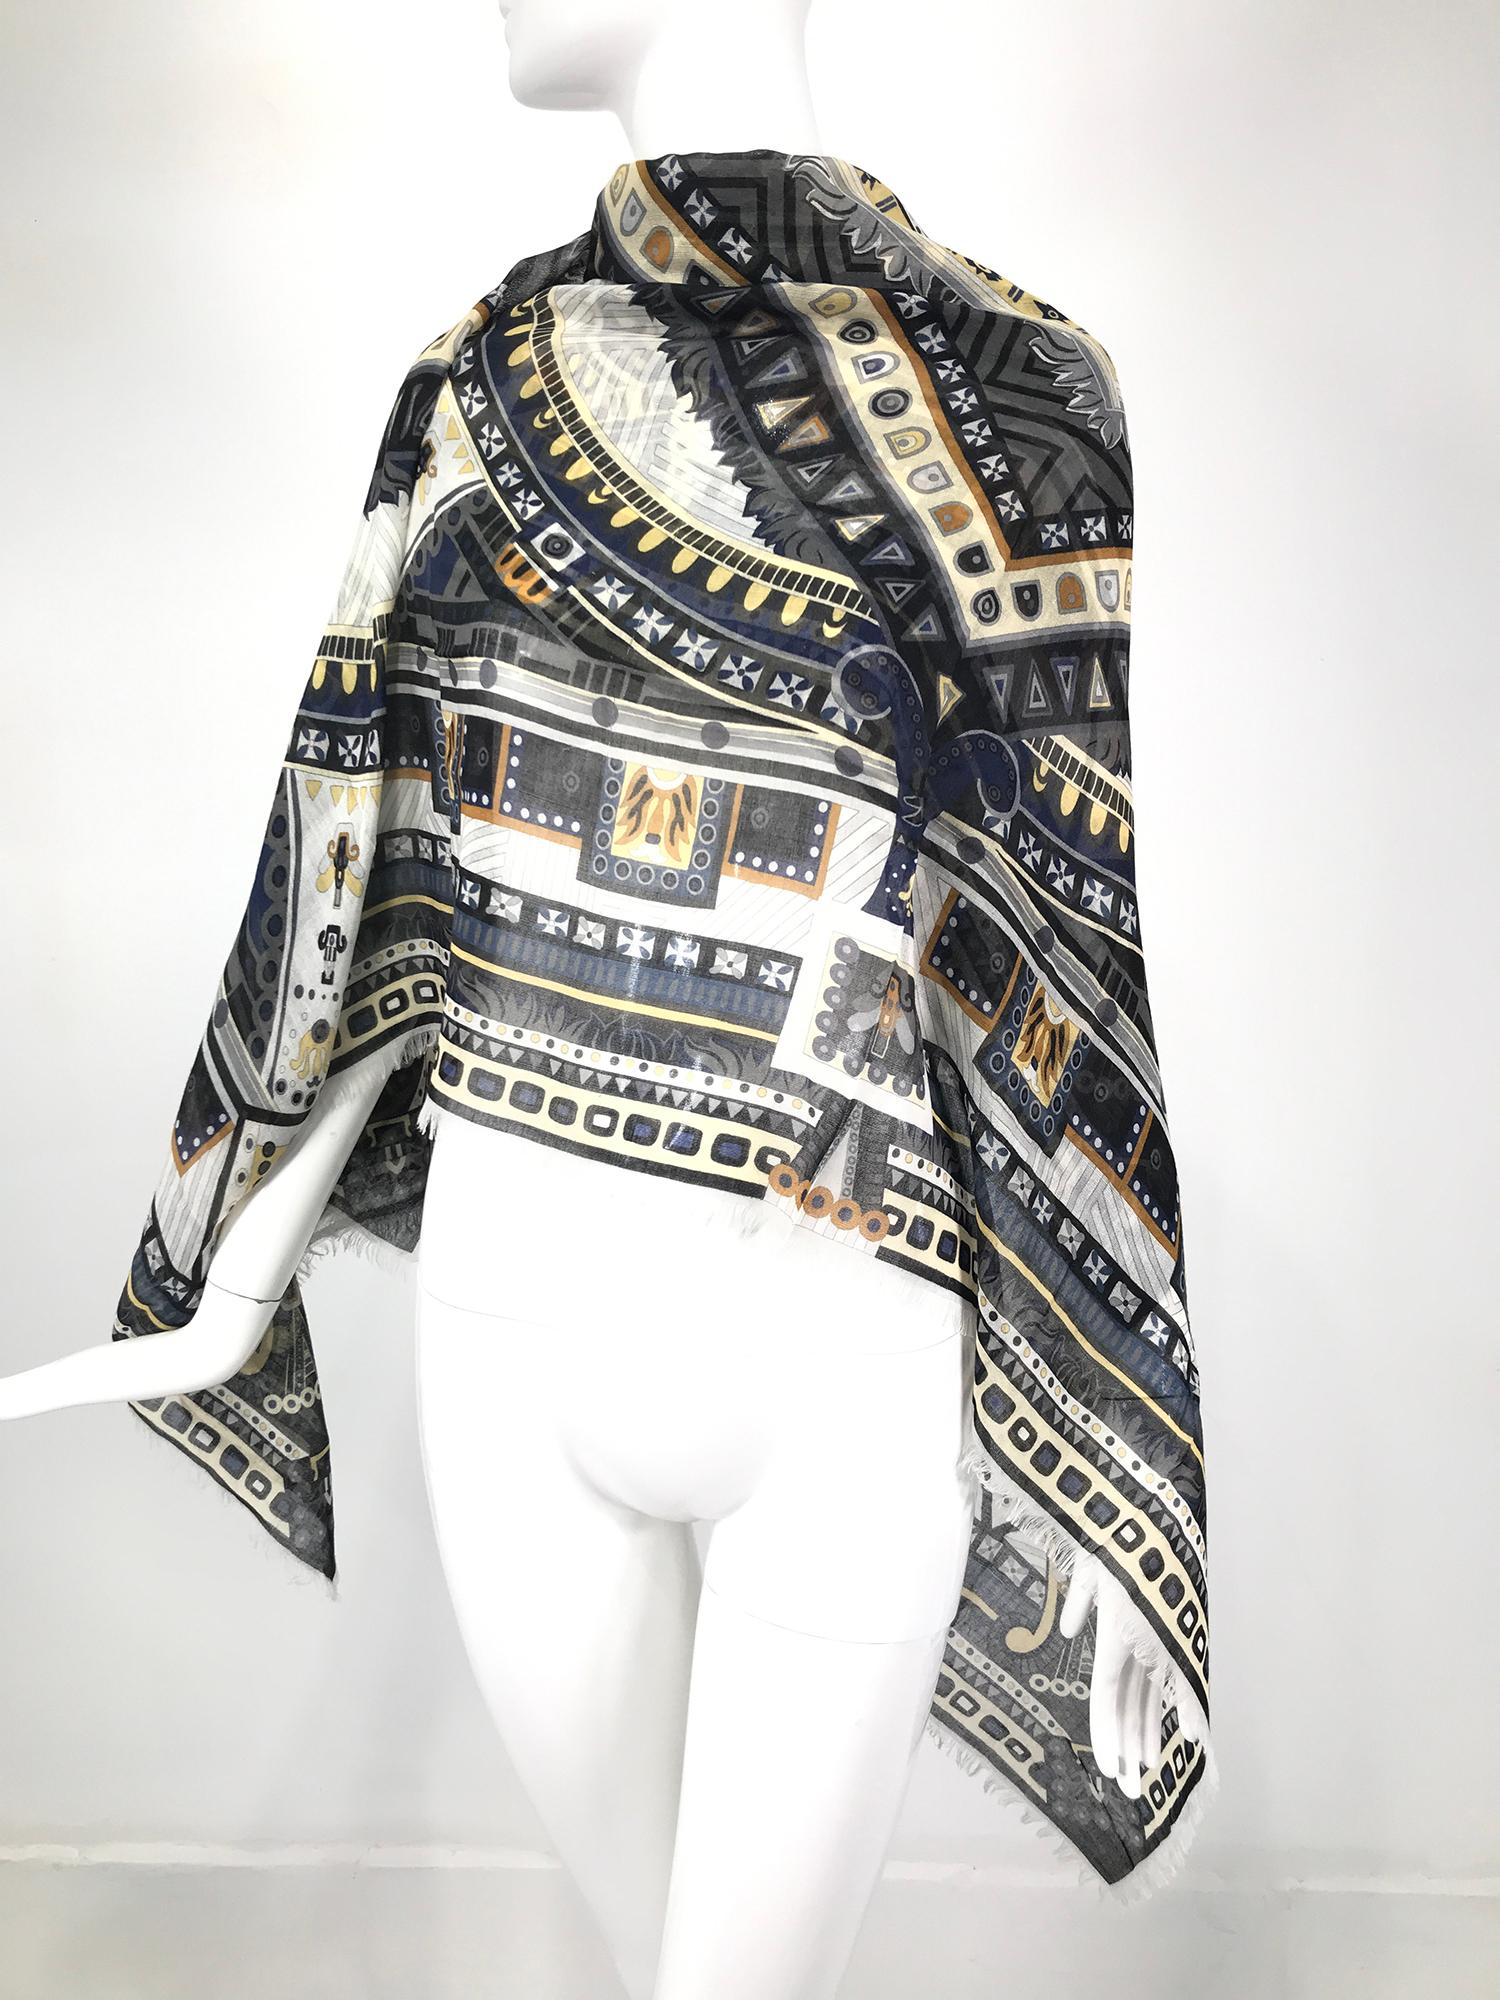 Salvatore Ferragamo cashmere & silk geometric print shawl with a narrow self fringe. This beautiful shawl is light as air and warm as toast. The design is bold in greys and black with touches of gold. The large size works as a shawl for evenings and